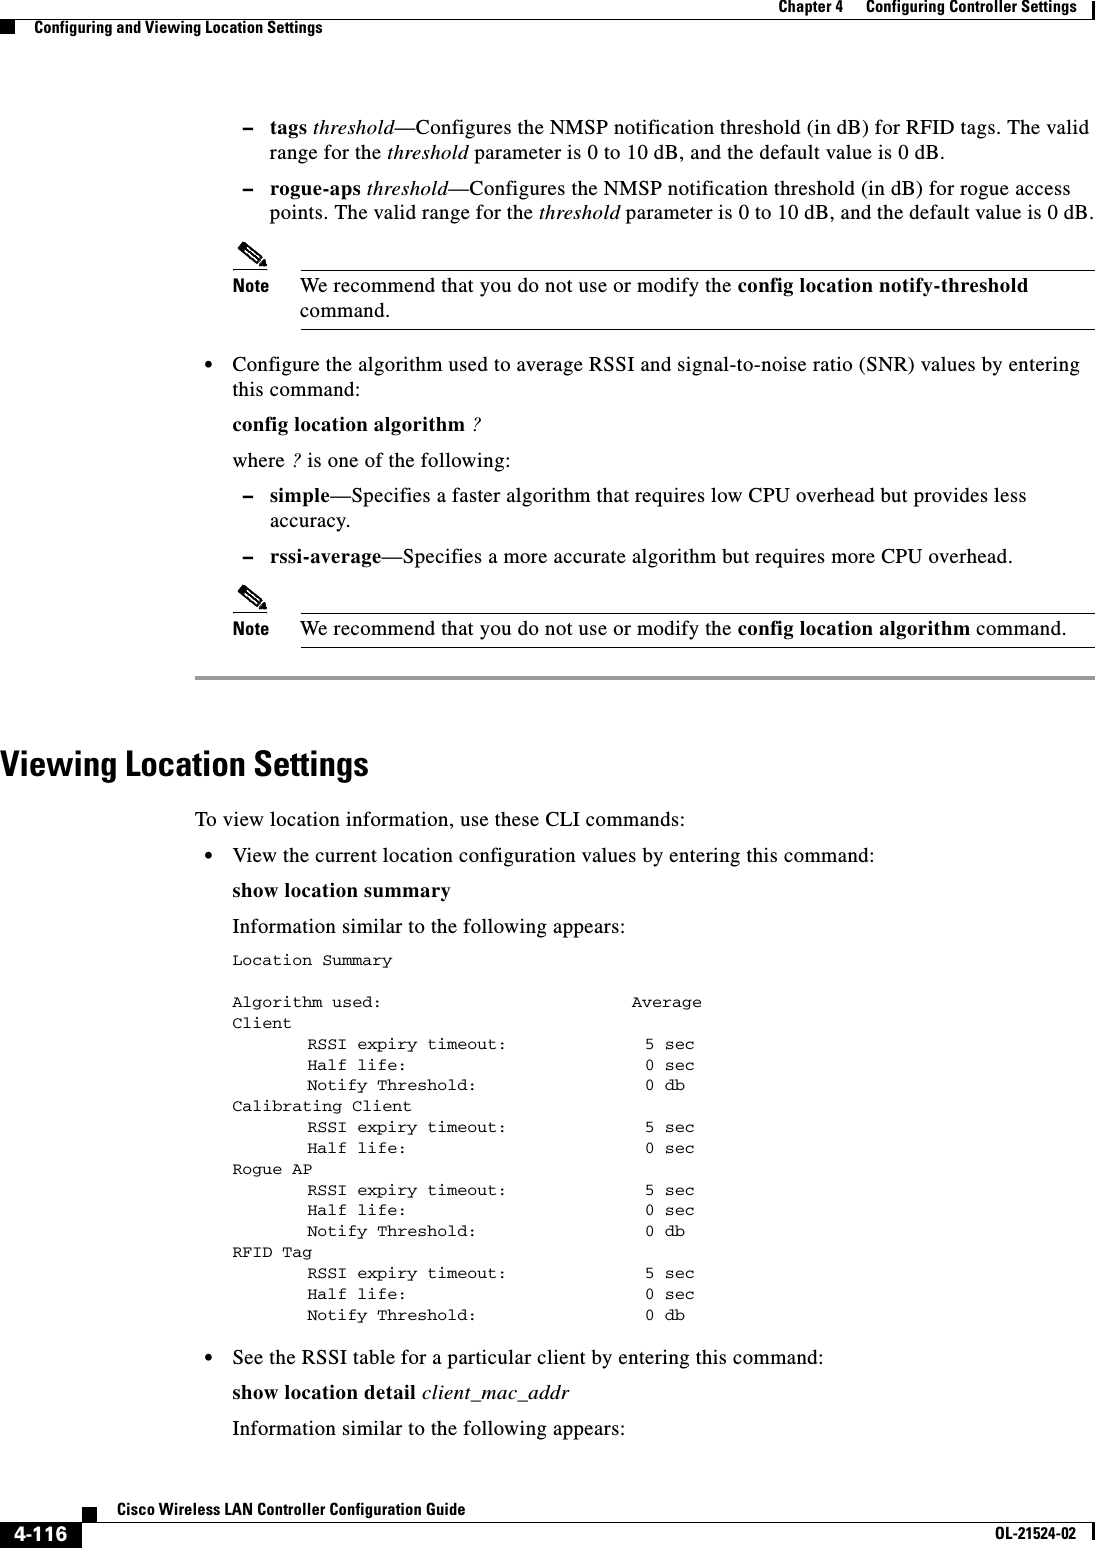  4-116Cisco Wireless LAN Controller Configuration GuideOL-21524-02Chapter 4      Configuring Controller SettingsConfiguring and Viewing Location Settings  –tags threshold—Configures the NMSP notification threshold (in dB) for RFID tags. The valid range for the threshold parameter is 0 to 10 dB, and the default value is 0 dB.  –rogue-aps threshold—Configures the NMSP notification threshold (in dB) for rogue access points. The valid range for the threshold parameter is 0 to 10 dB, and the default value is 0 dB.Note We recommend that you do not use or modify the config location notify-threshold command.  • Configure the algorithm used to average RSSI and signal-to-noise ratio (SNR) values by entering this command:config location algorithm ?where ? is one of the following:  –simple—Specifies a faster algorithm that requires low CPU overhead but provides less accuracy.  –rssi-average—Specifies a more accurate algorithm but requires more CPU overhead.Note We recommend that you do not use or modify the config location algorithm command.Viewing Location SettingsTo view location information, use these CLI commands:  • View the current location configuration values by entering this command:show location summaryInformation similar to the following appears:Location Summary Algorithm used:                         AverageClientRSSI expiry timeout:  5 secHalf life: 0 secNotify Threshold: 0 dbCalibrating ClientRSSI expiry timeout:  5 secHalf life: 0 secRogue APRSSI expiry timeout:            5 secHalf life: 0 secNotify Threshold: 0 dbRFID TagRSSI expiry timeout:           5 secHalf life: 0 secNotify Threshold: 0 db   • See the RSSI table for a particular client by entering this command:show location detail client_mac_addrInformation similar to the following appears: